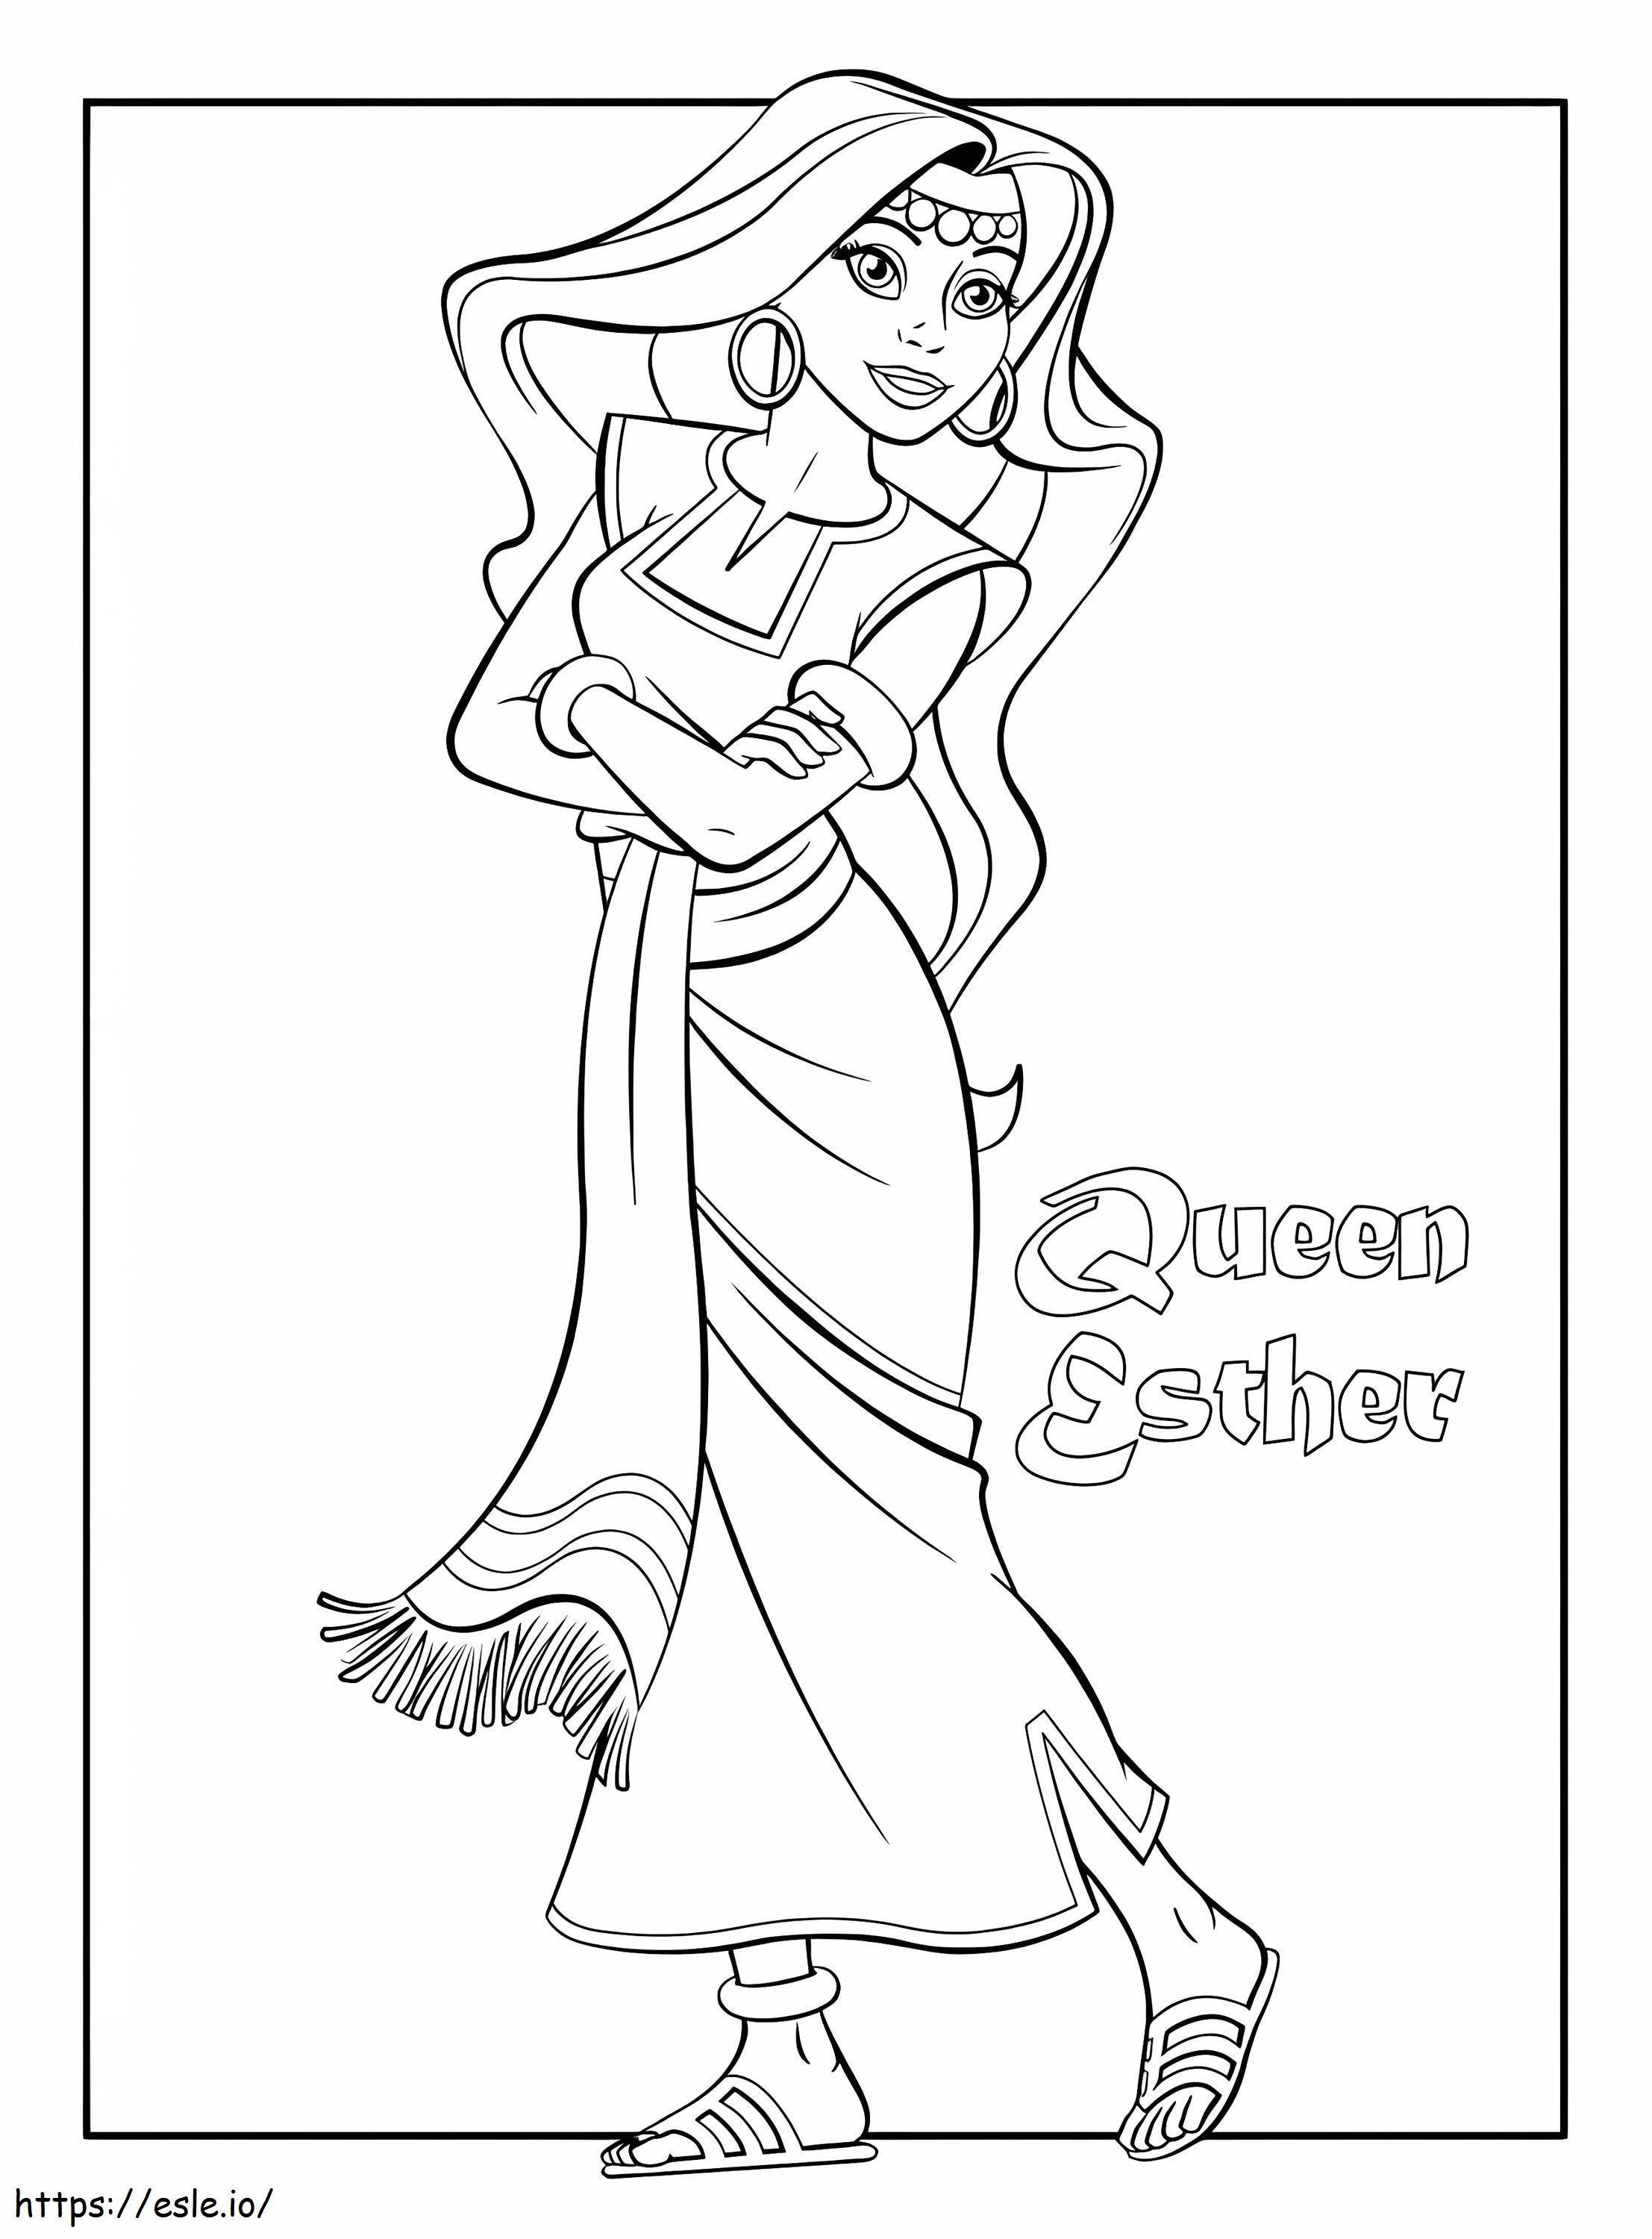 Queen Esther 2 coloring page